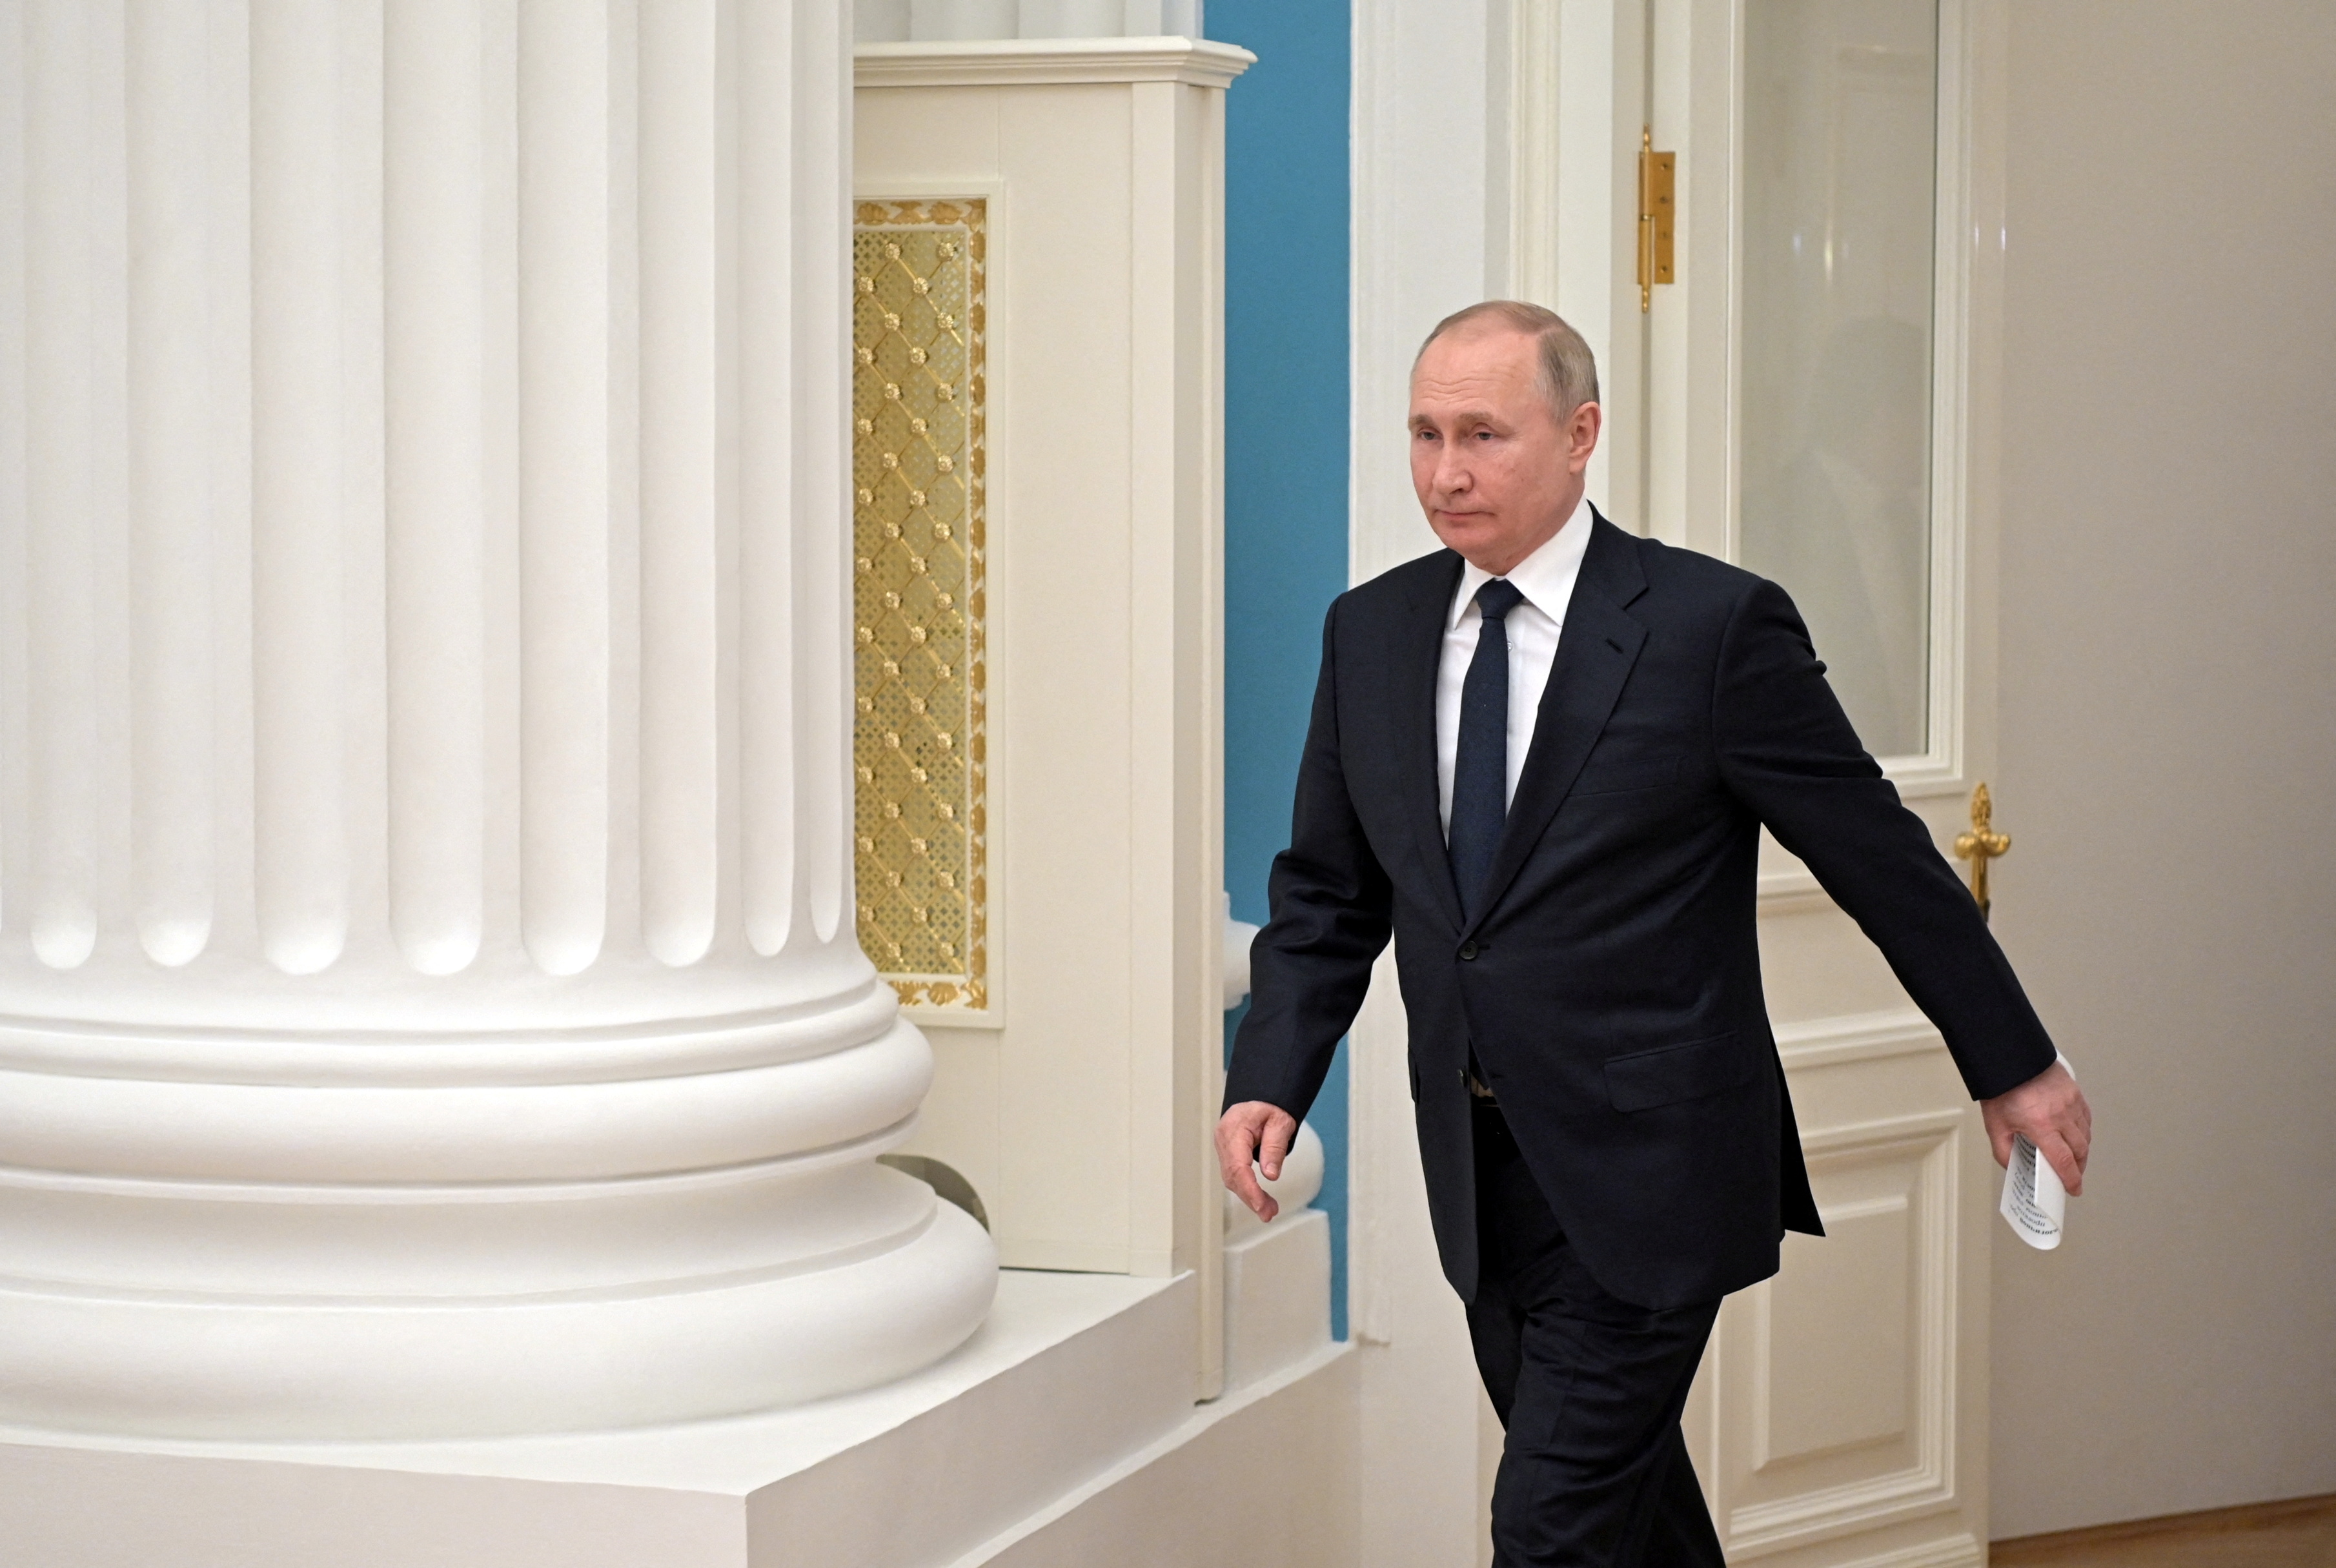 Russian President Vladimir Putin arrives for a meeting with representatives of the business community at the Kremlin in Moscow, Russia February 24, 2022. Sputnik/Aleksey Nikolskyi/Kremlin via REUTERS